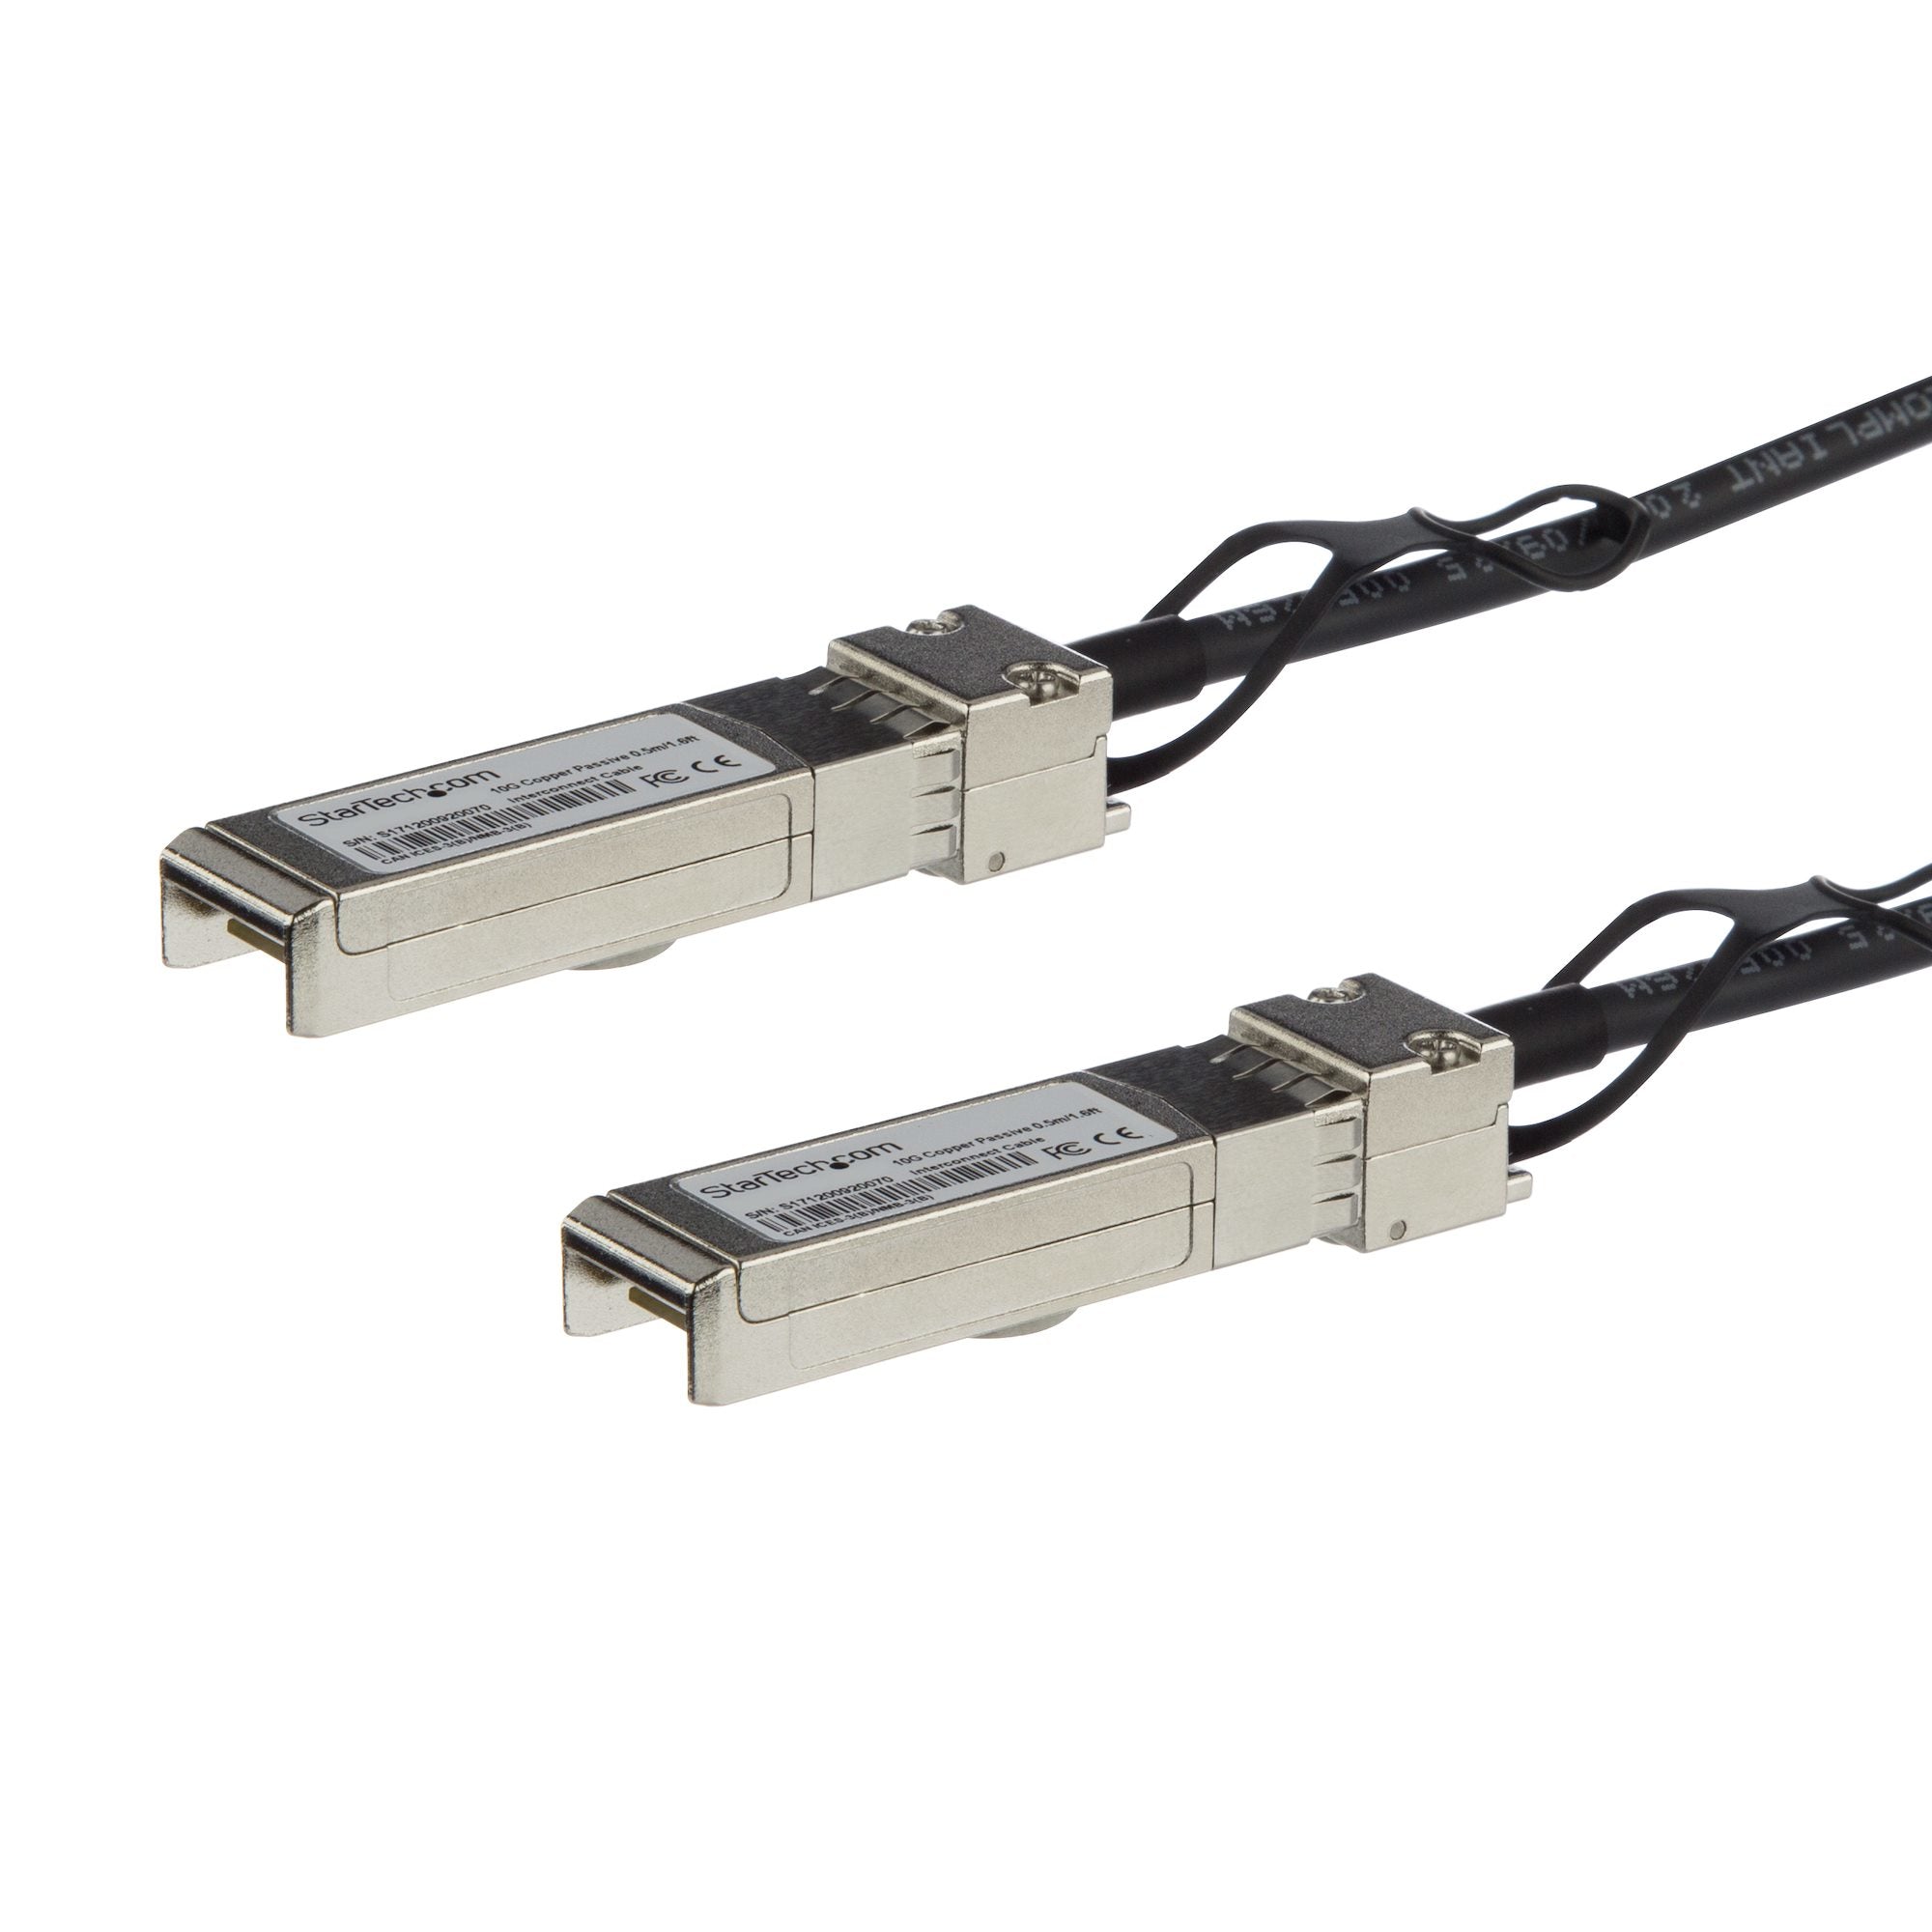 MSA Uncoded Compatible 5m 10G SFP+ to SFP+ Direct Attach Breakout Cable Twinax - 10 GbE SFP+ Copper DAC 10 Gbps Low Power Passive Transceiver Module DAC